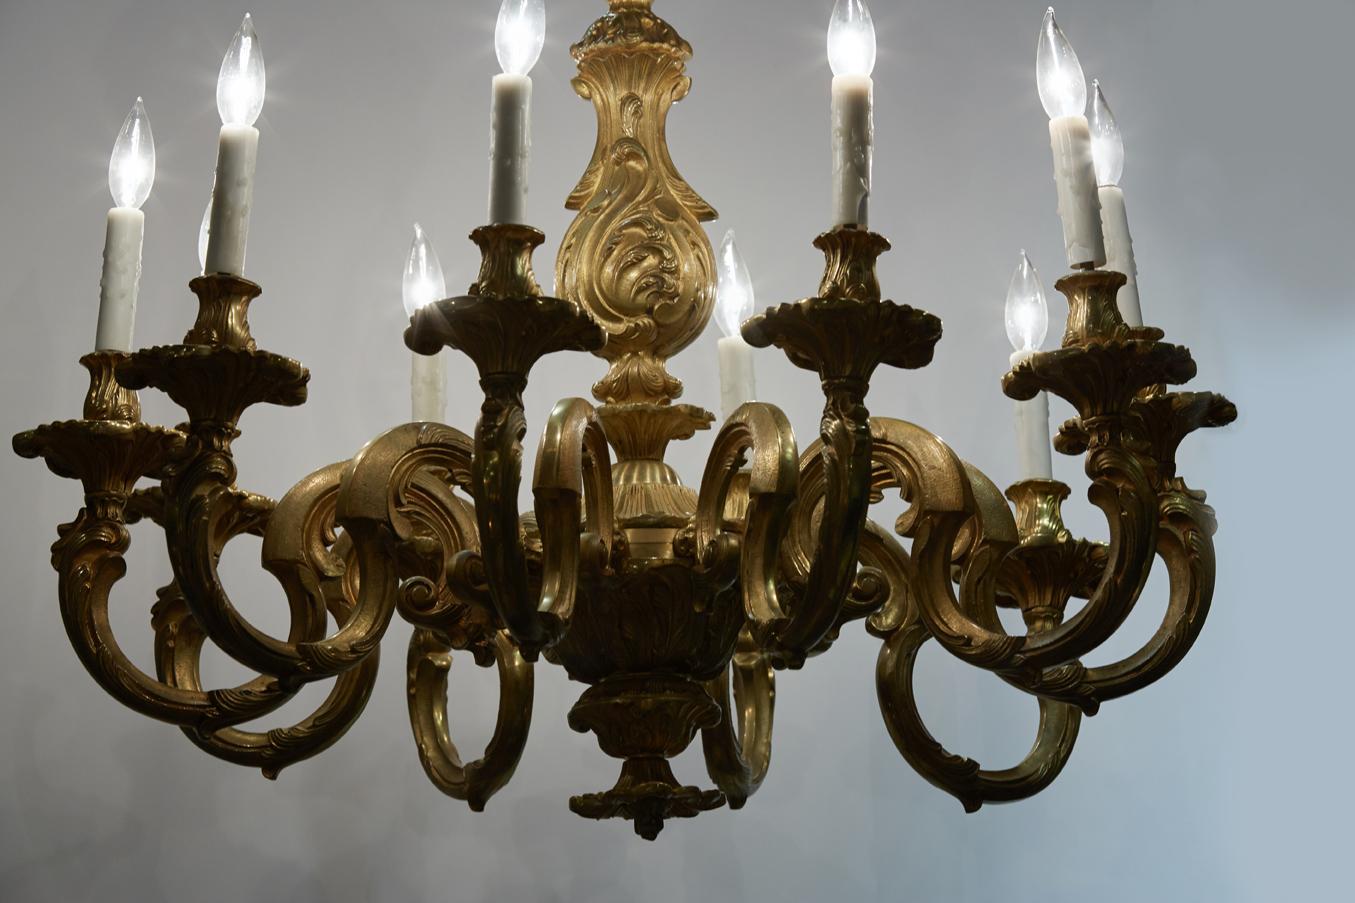 Substantial gilt bronze Regence style chandelier. The bronze is finely chased and gilt.